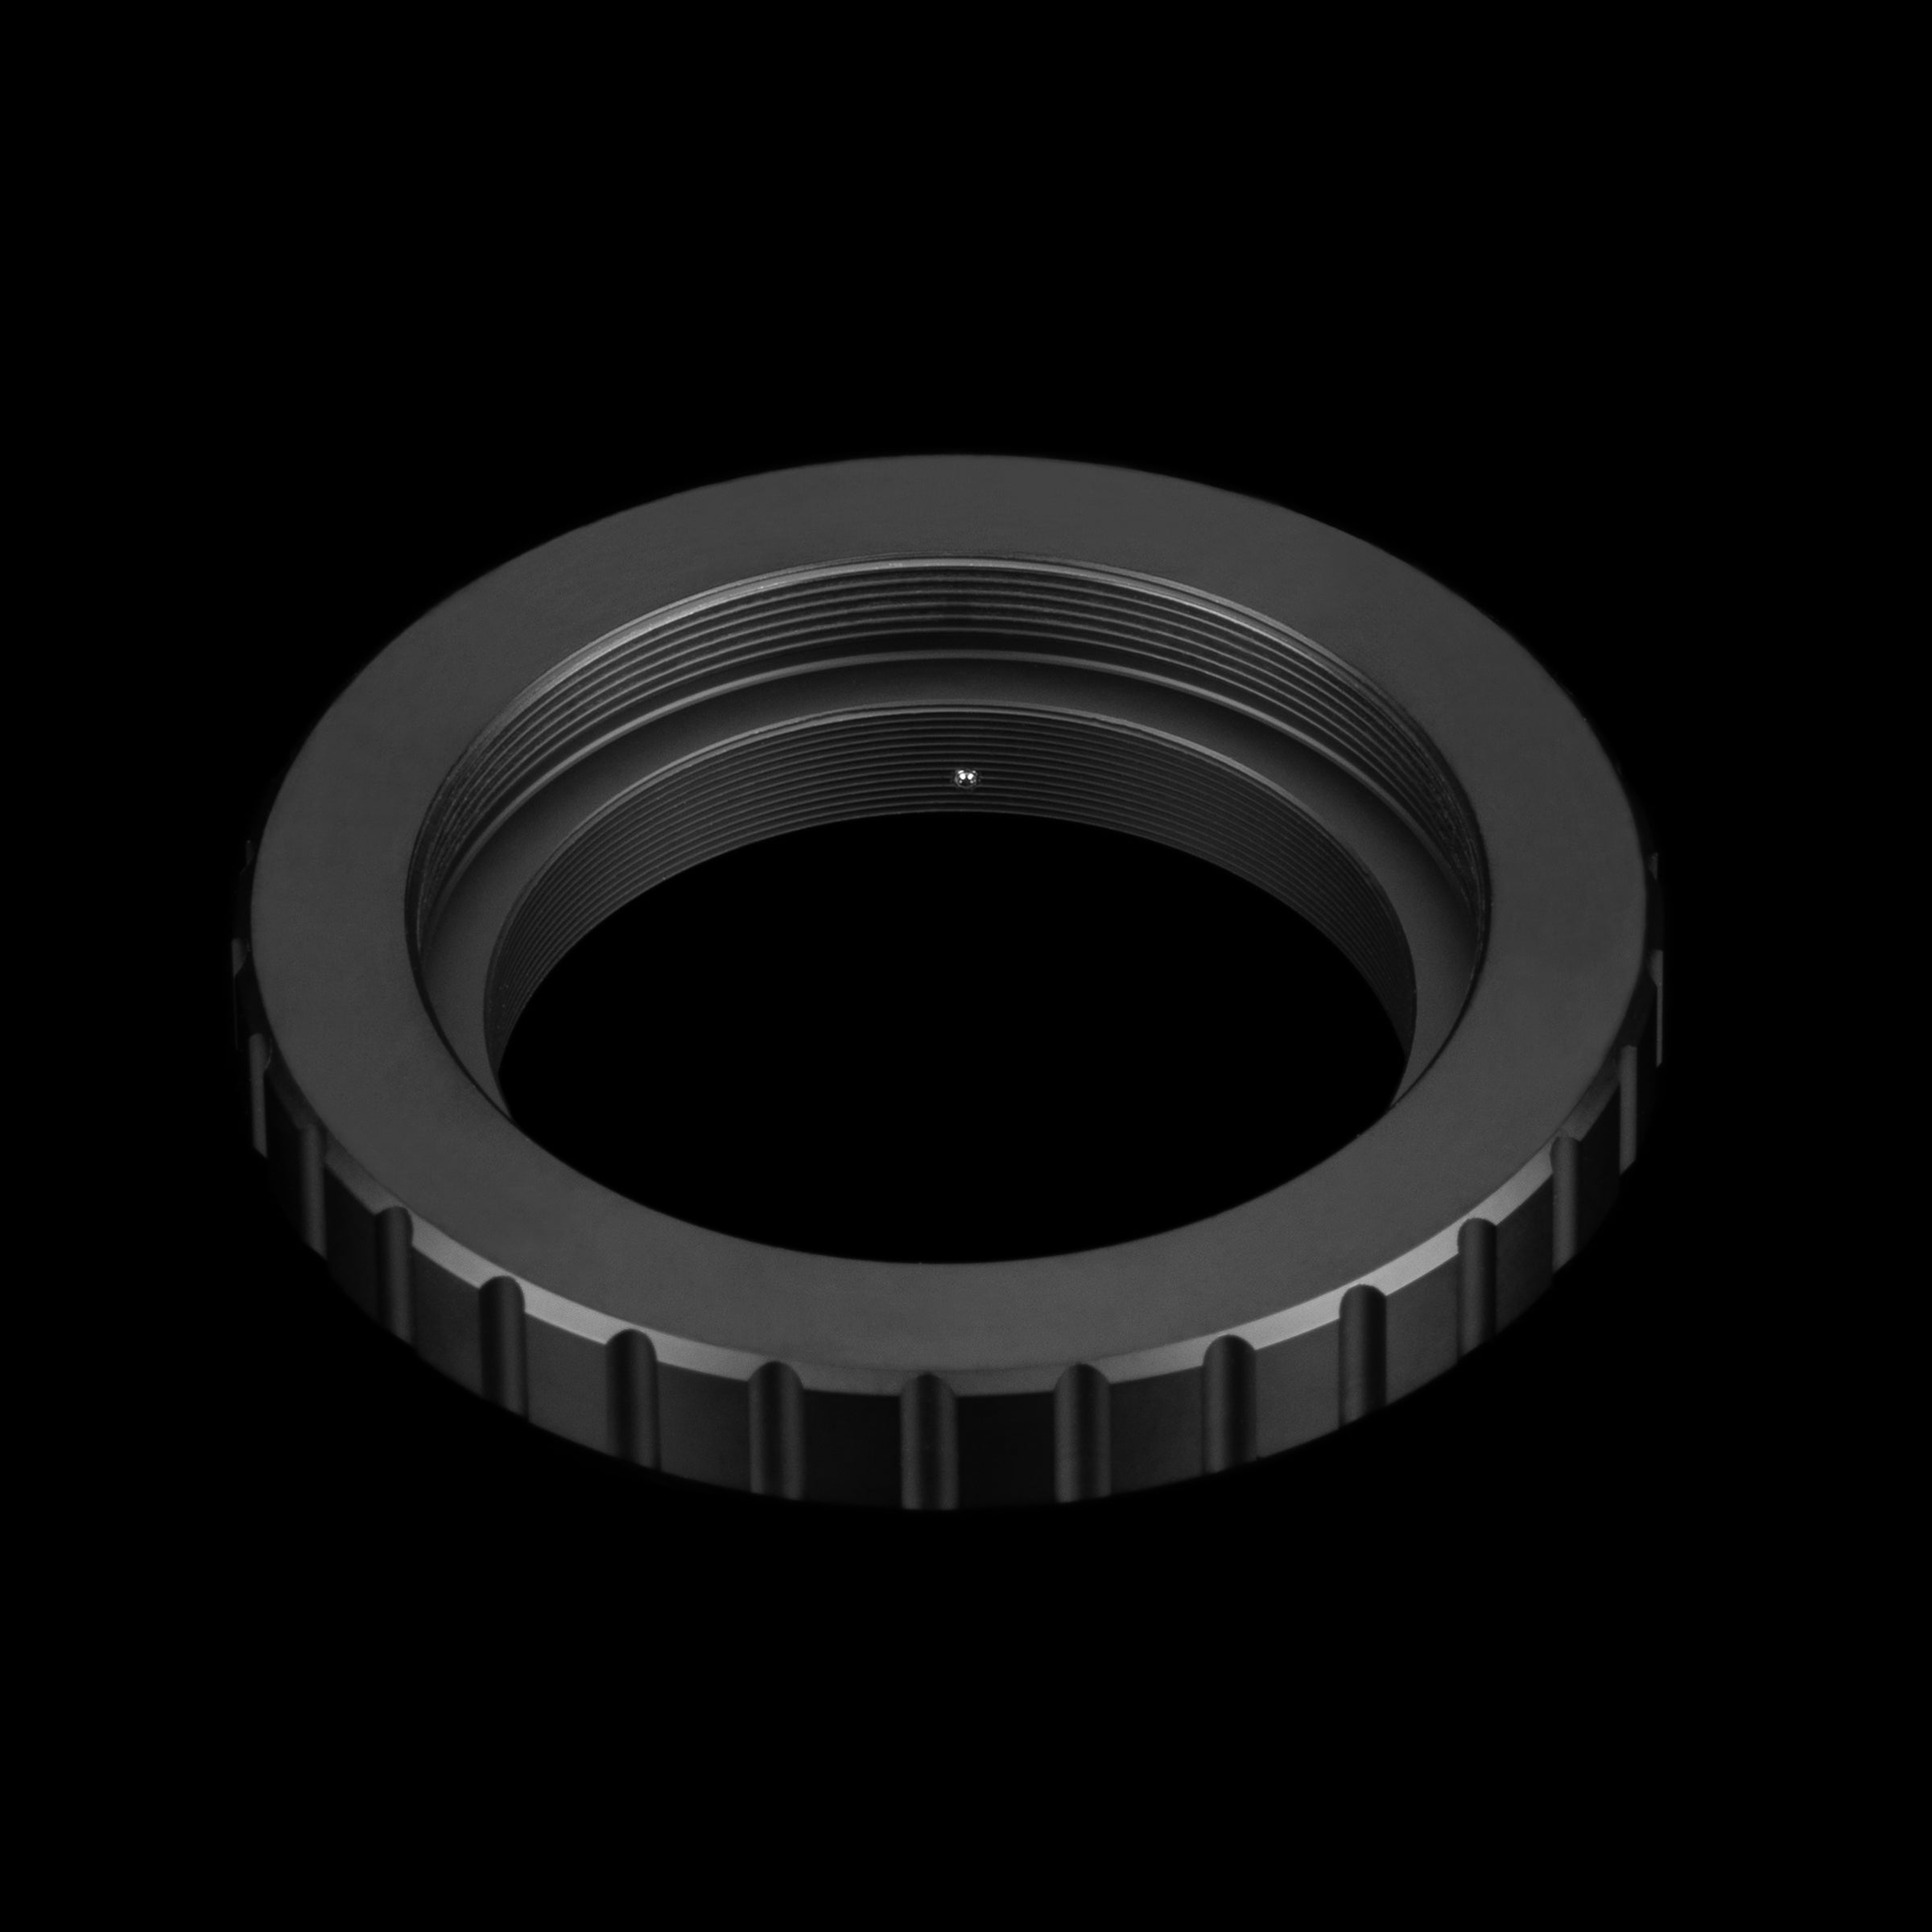 48mm T mount for Nikon F